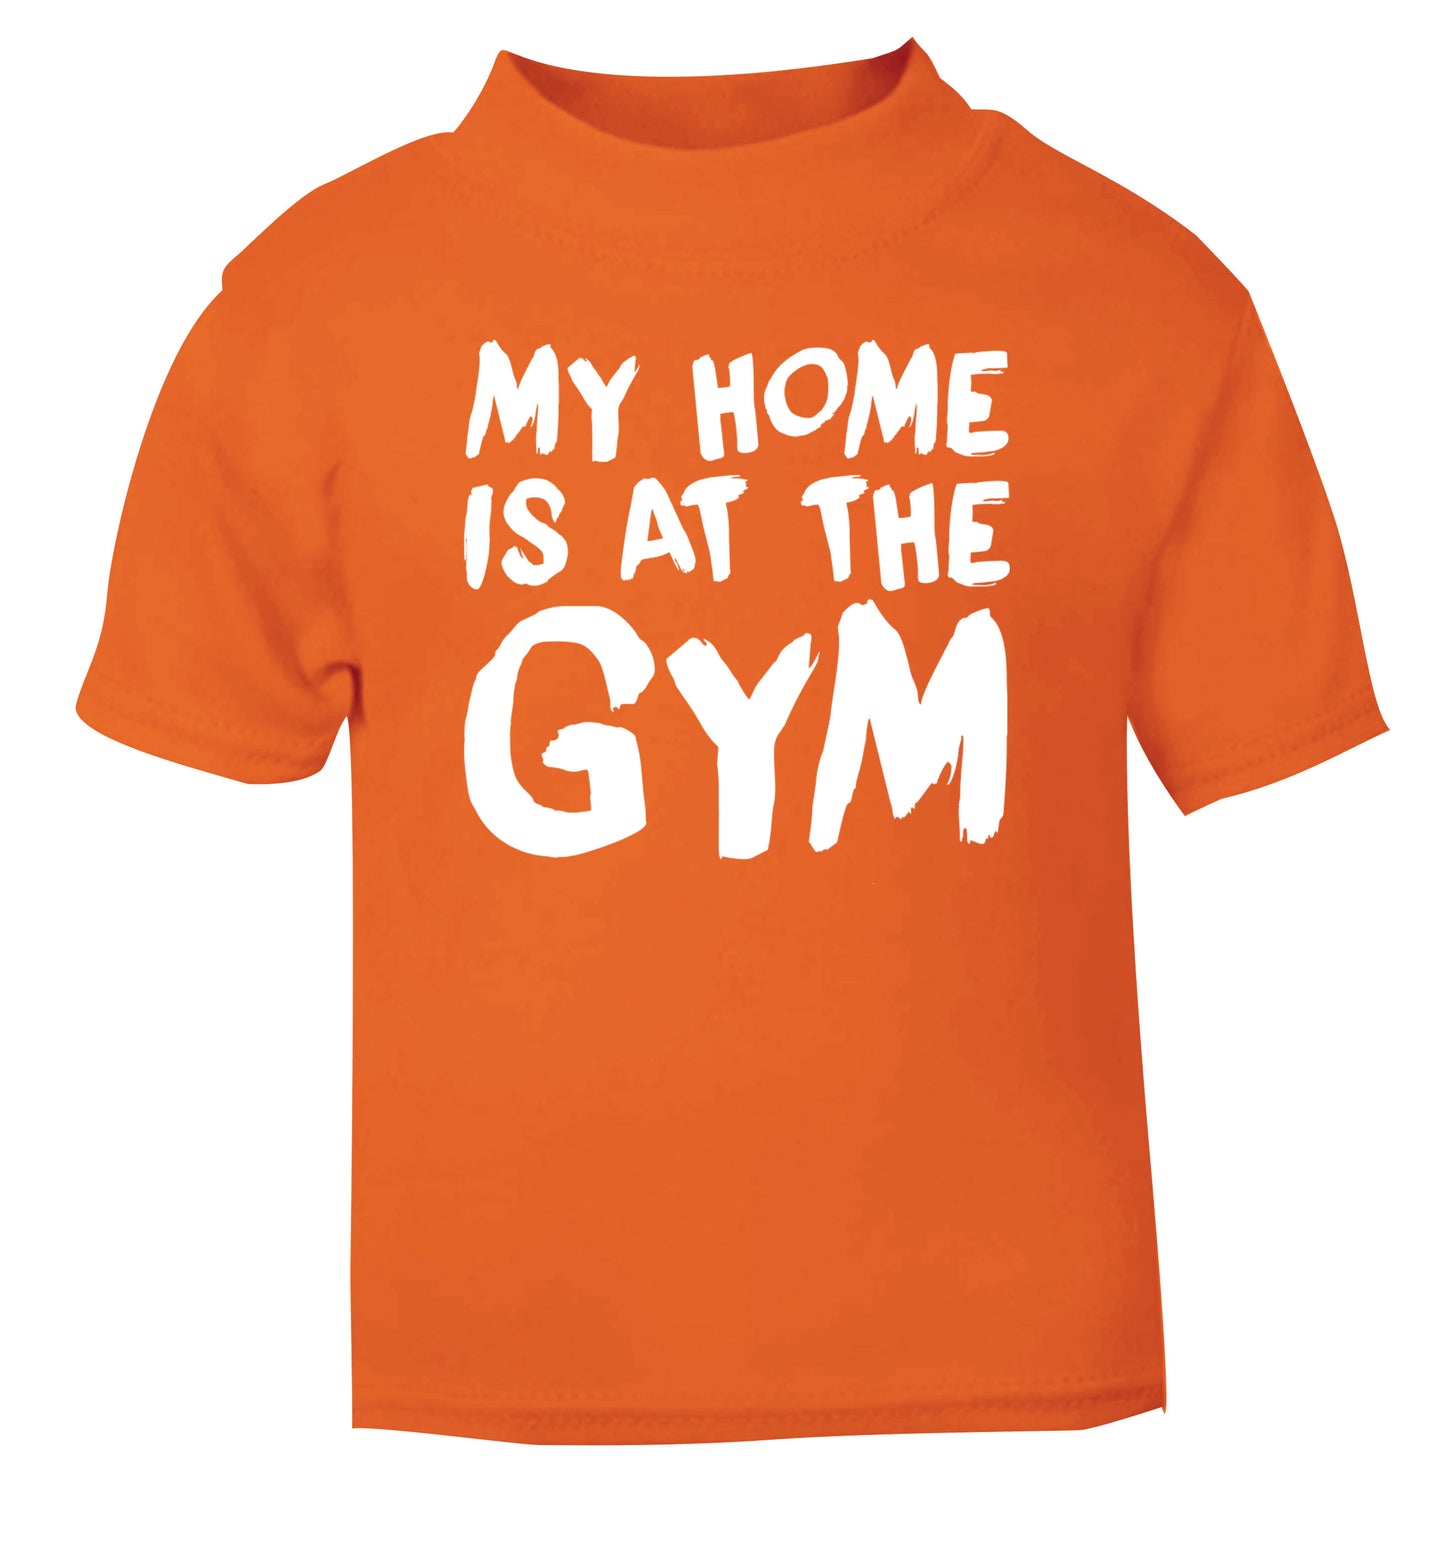 My home is at the gym orange Baby Toddler Tshirt 2 Years